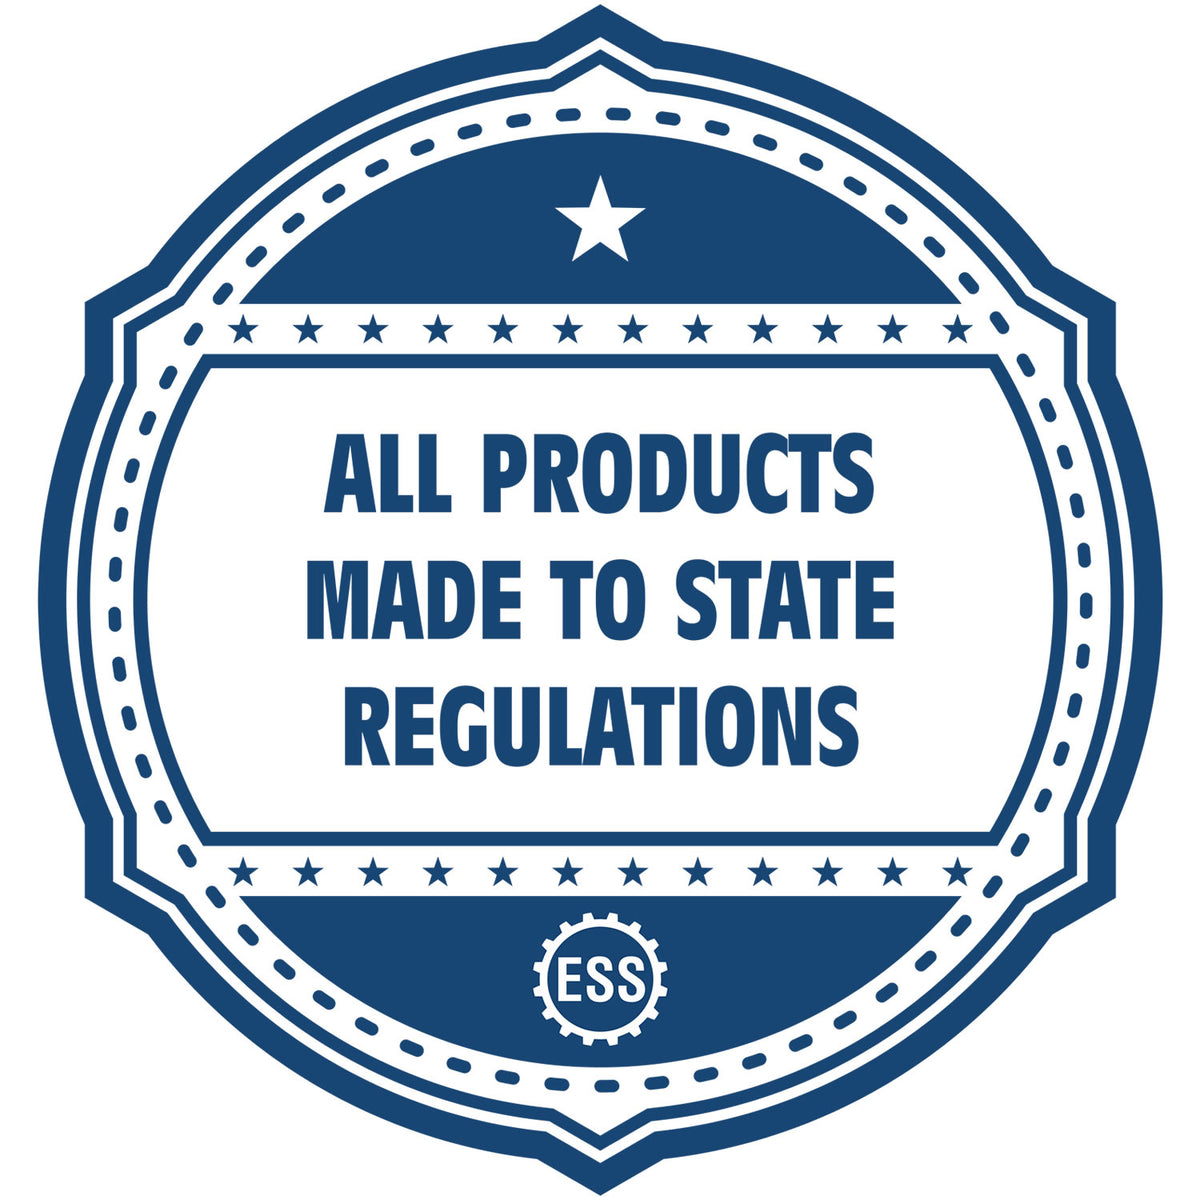 A blue icon or badge for the Hybrid South Dakota Architect Seal showing that this product is made in compliance with state regulations.